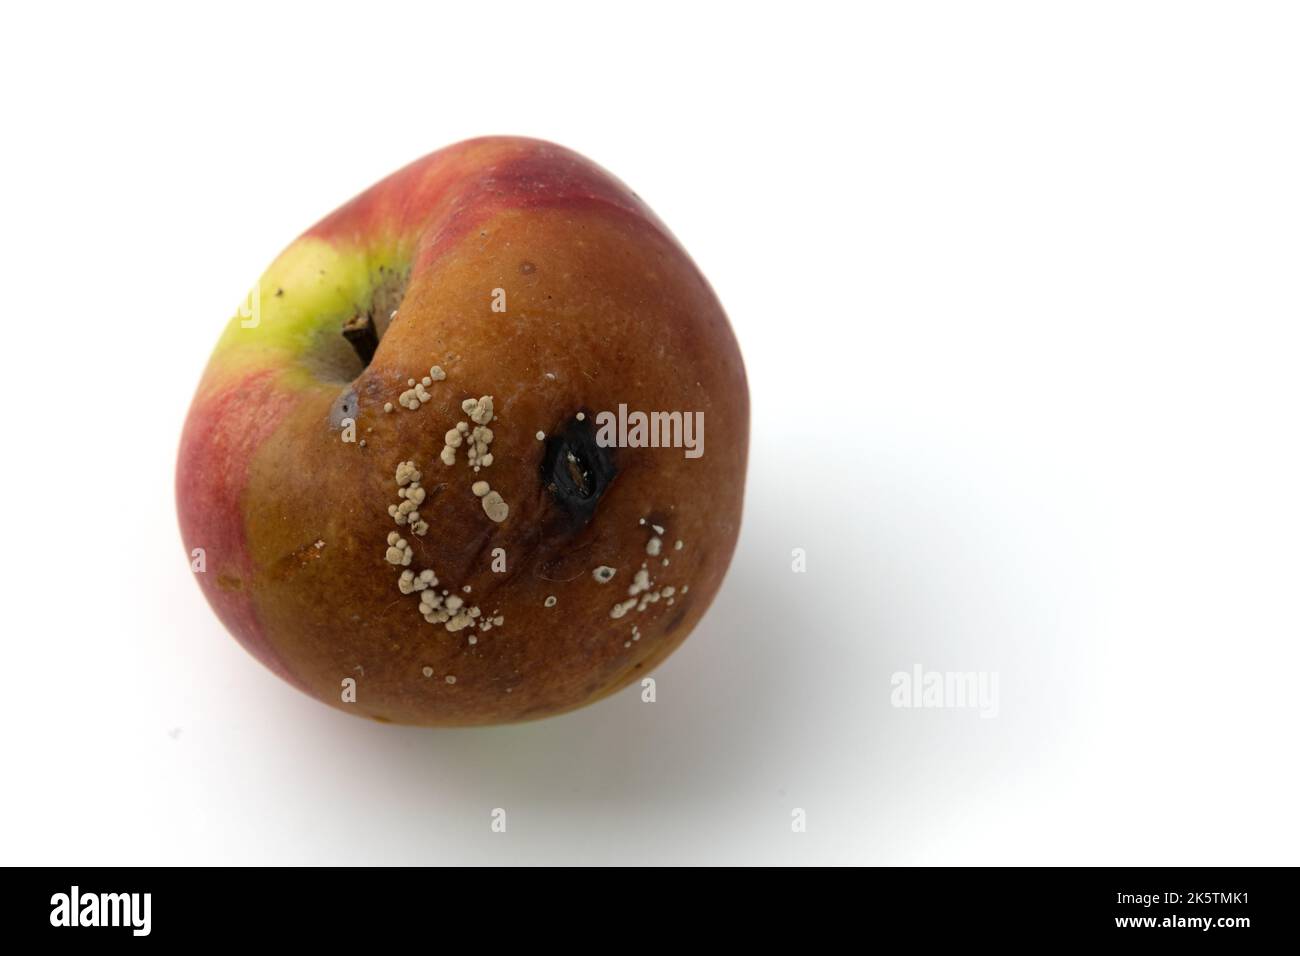 old rotten apple with moldy isolated on white background, rotting apples, decay and food waste concept Stock Photo